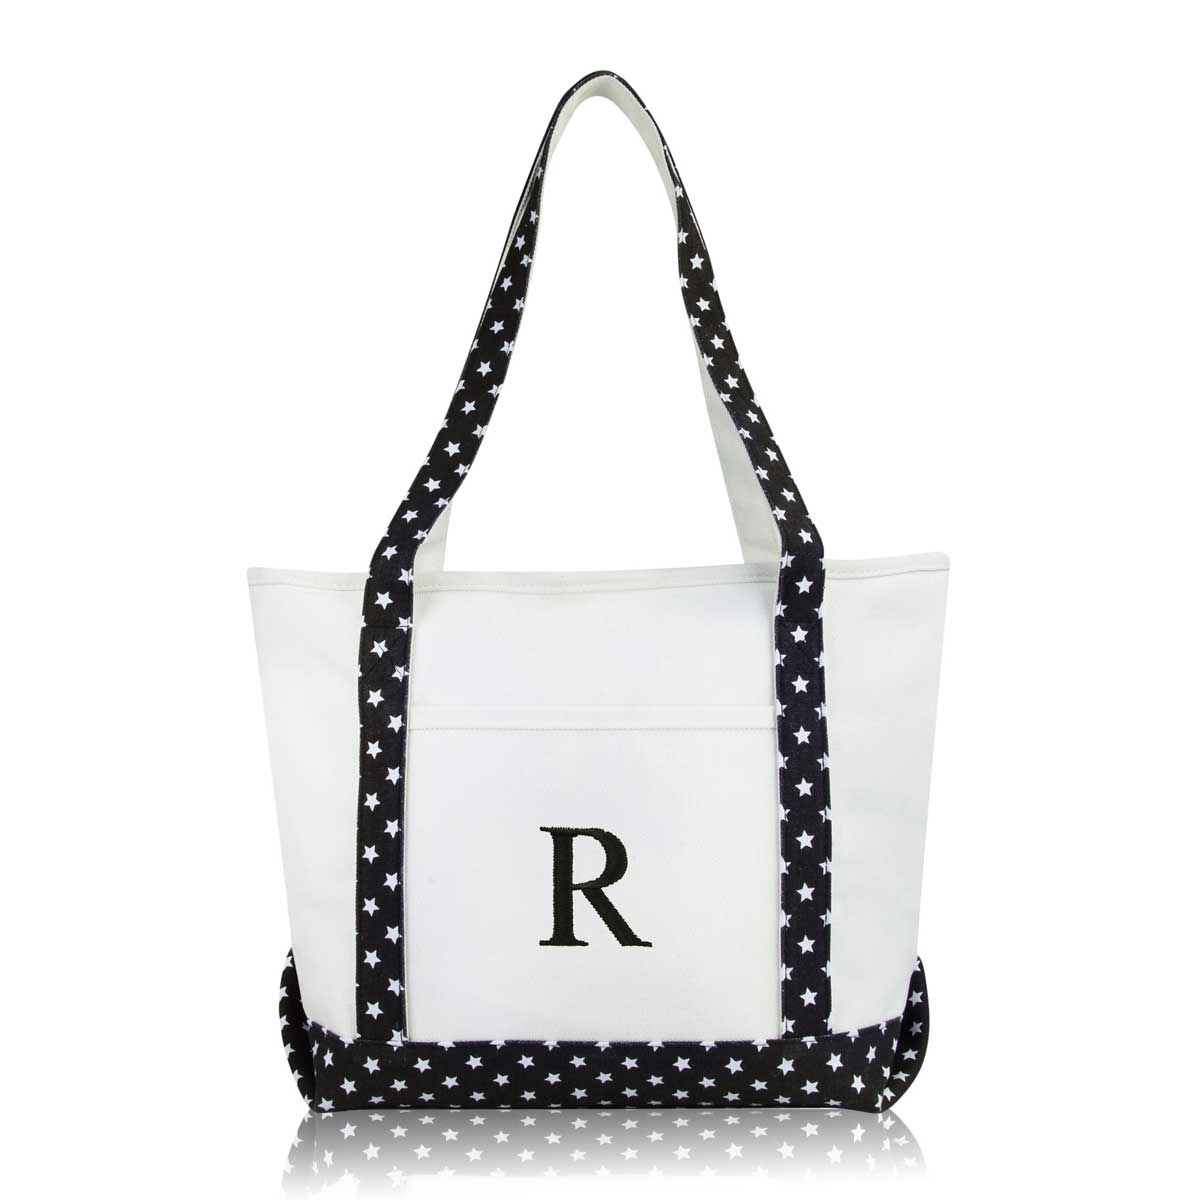 Dalix Medium Personalized Tote Bag Monogrammed Initial Letter - R